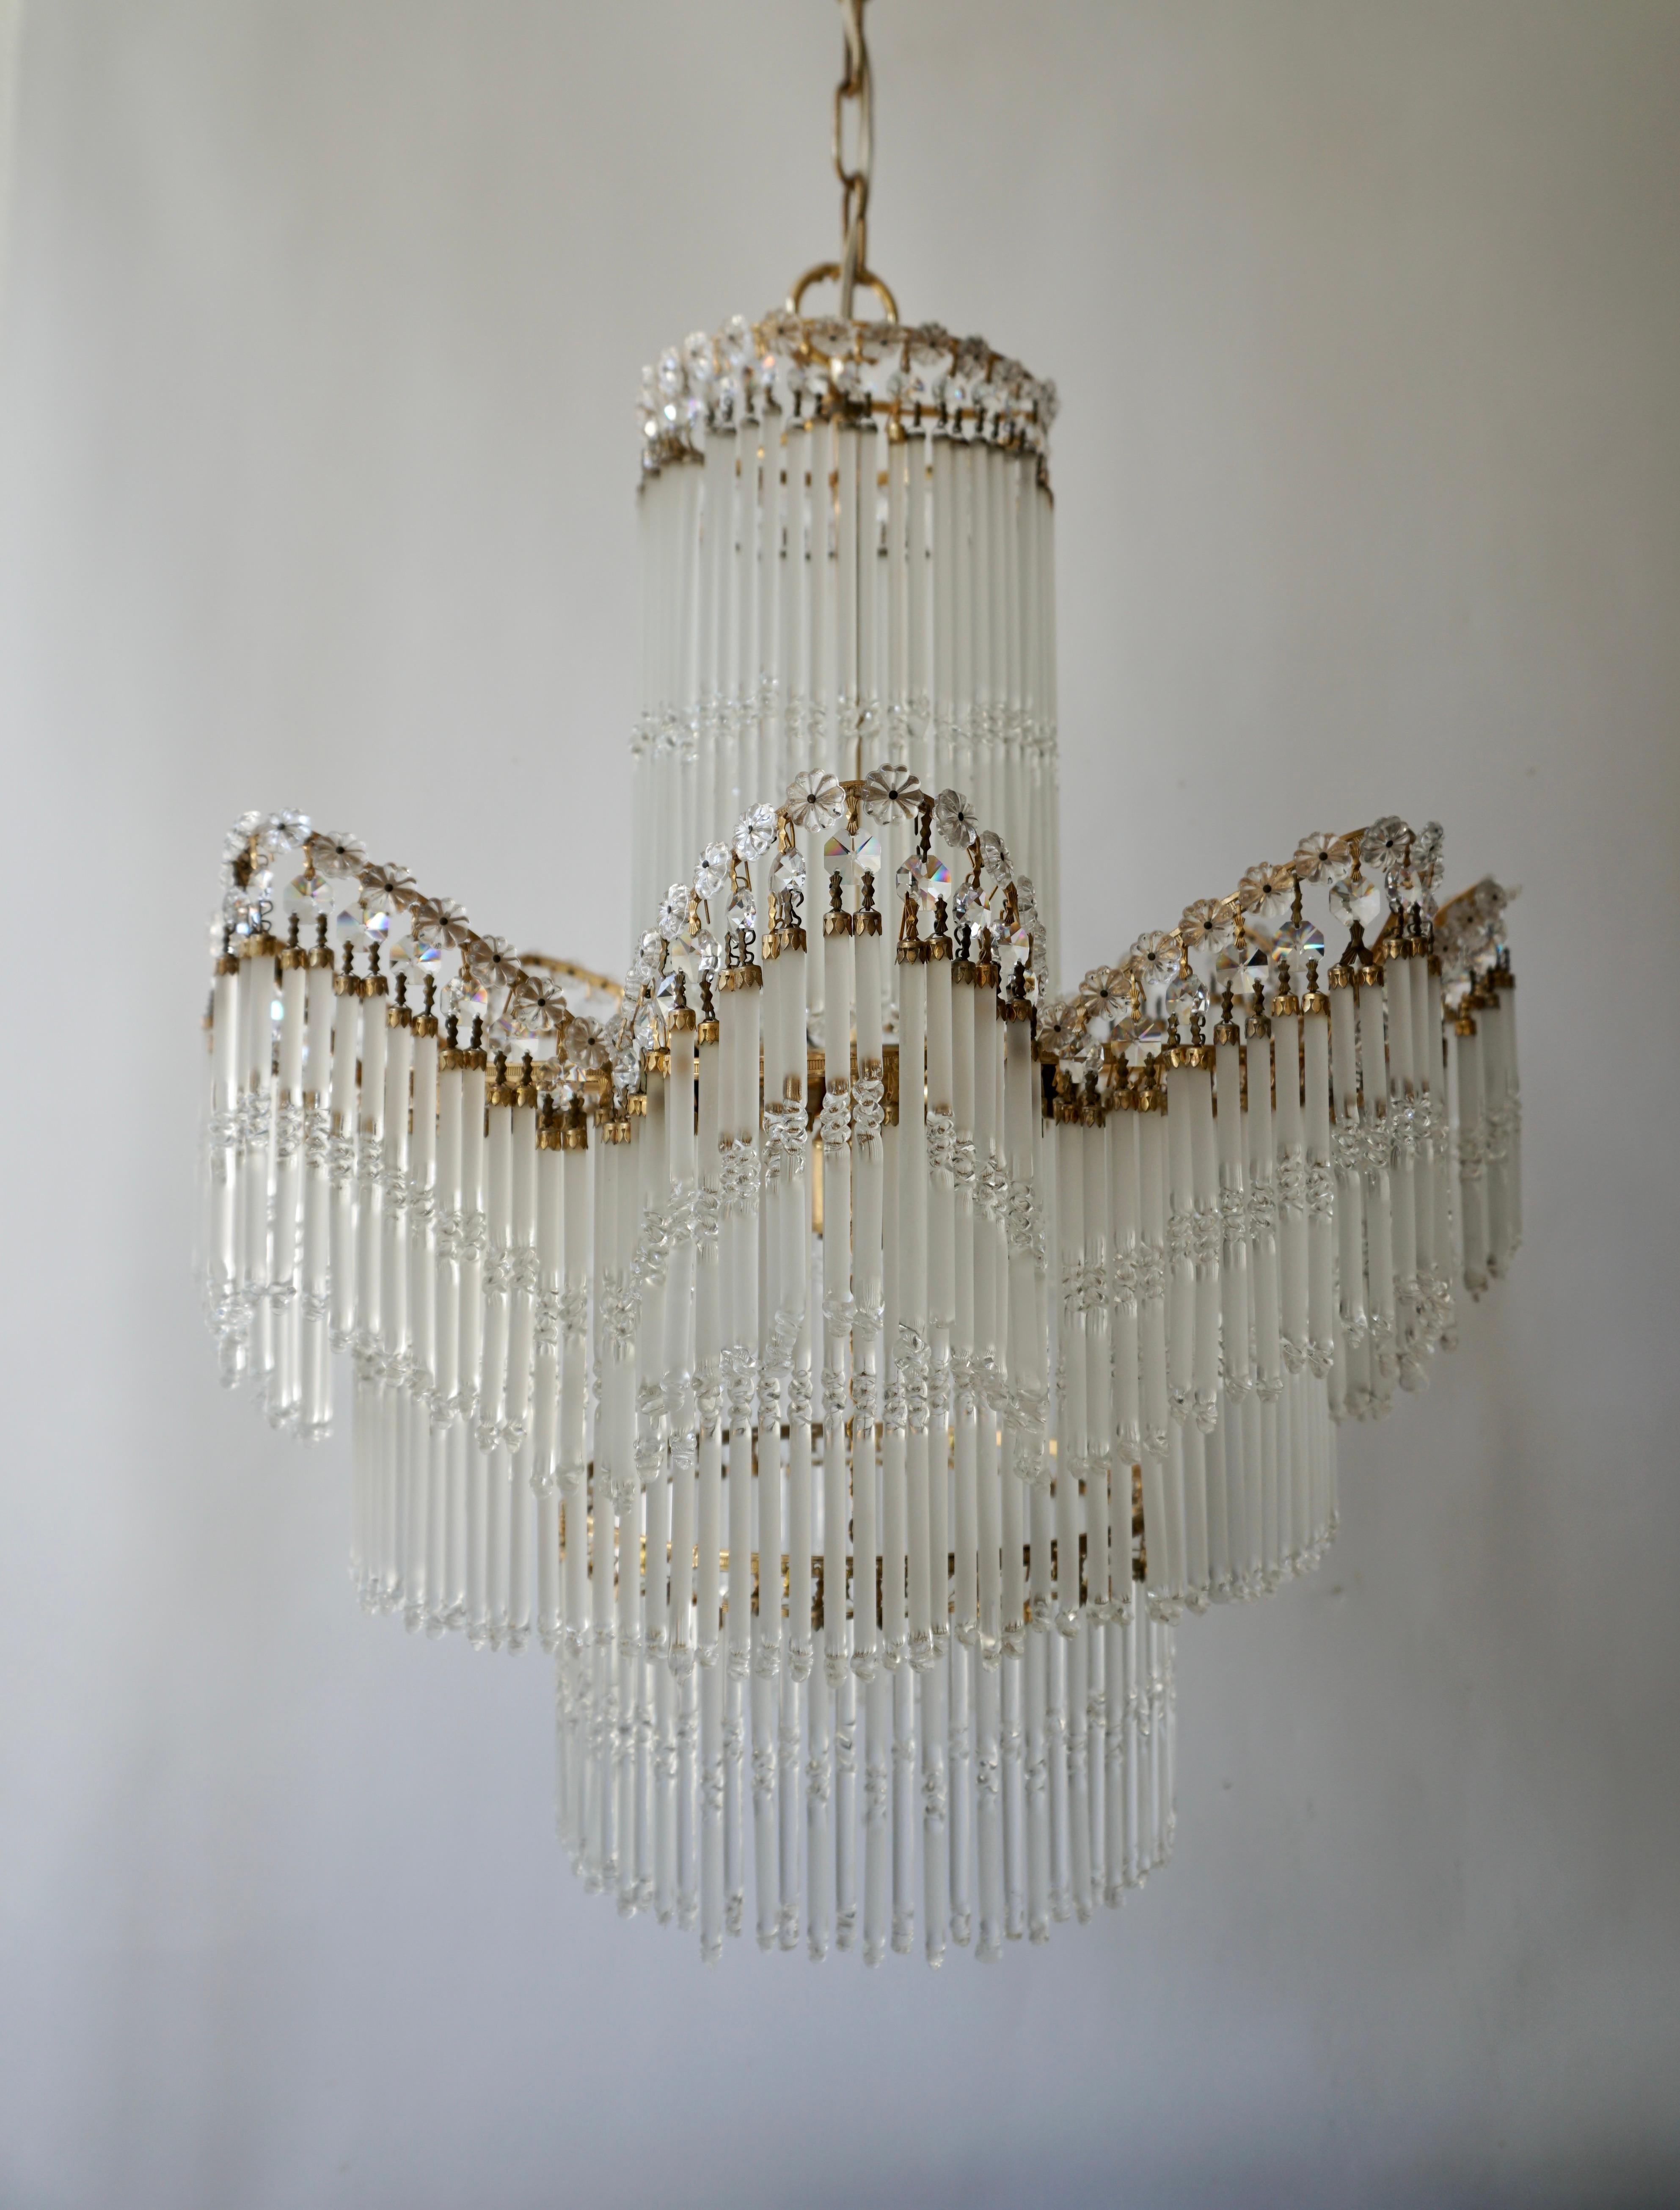 Spectacular chandelier with crystal tubes.

A very elegant design, in the shape of a beautiful flower. The crystals were hung one by one and the result is beautiful, with warmth, glamour, sophistication and elegance. Wherever you want to place this